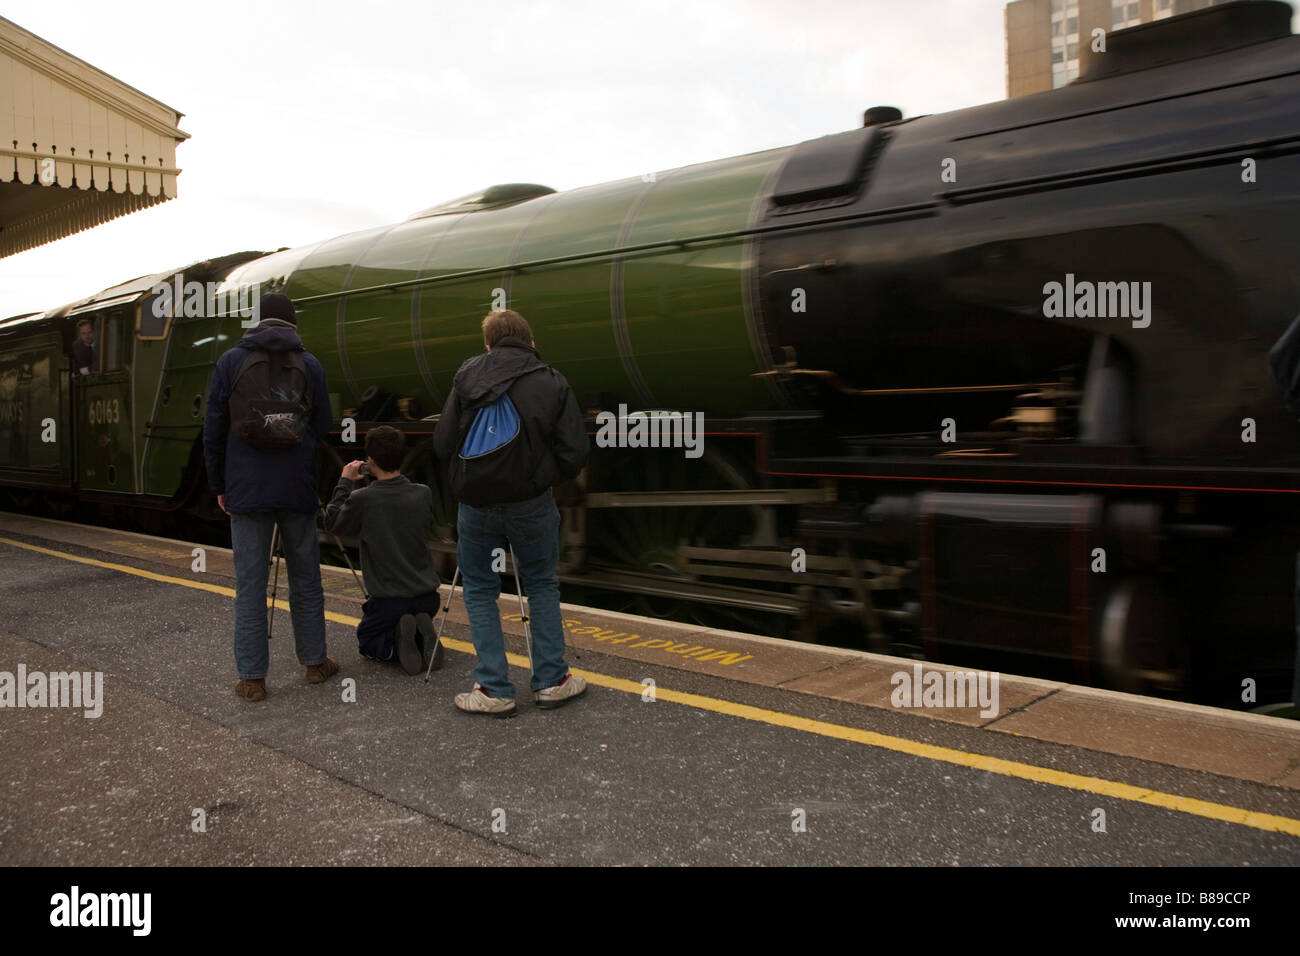 'Tornado' a Peppercorn A1 Pacific steam engine passes through Clapham Junction on route to Waterloo Stock Photo